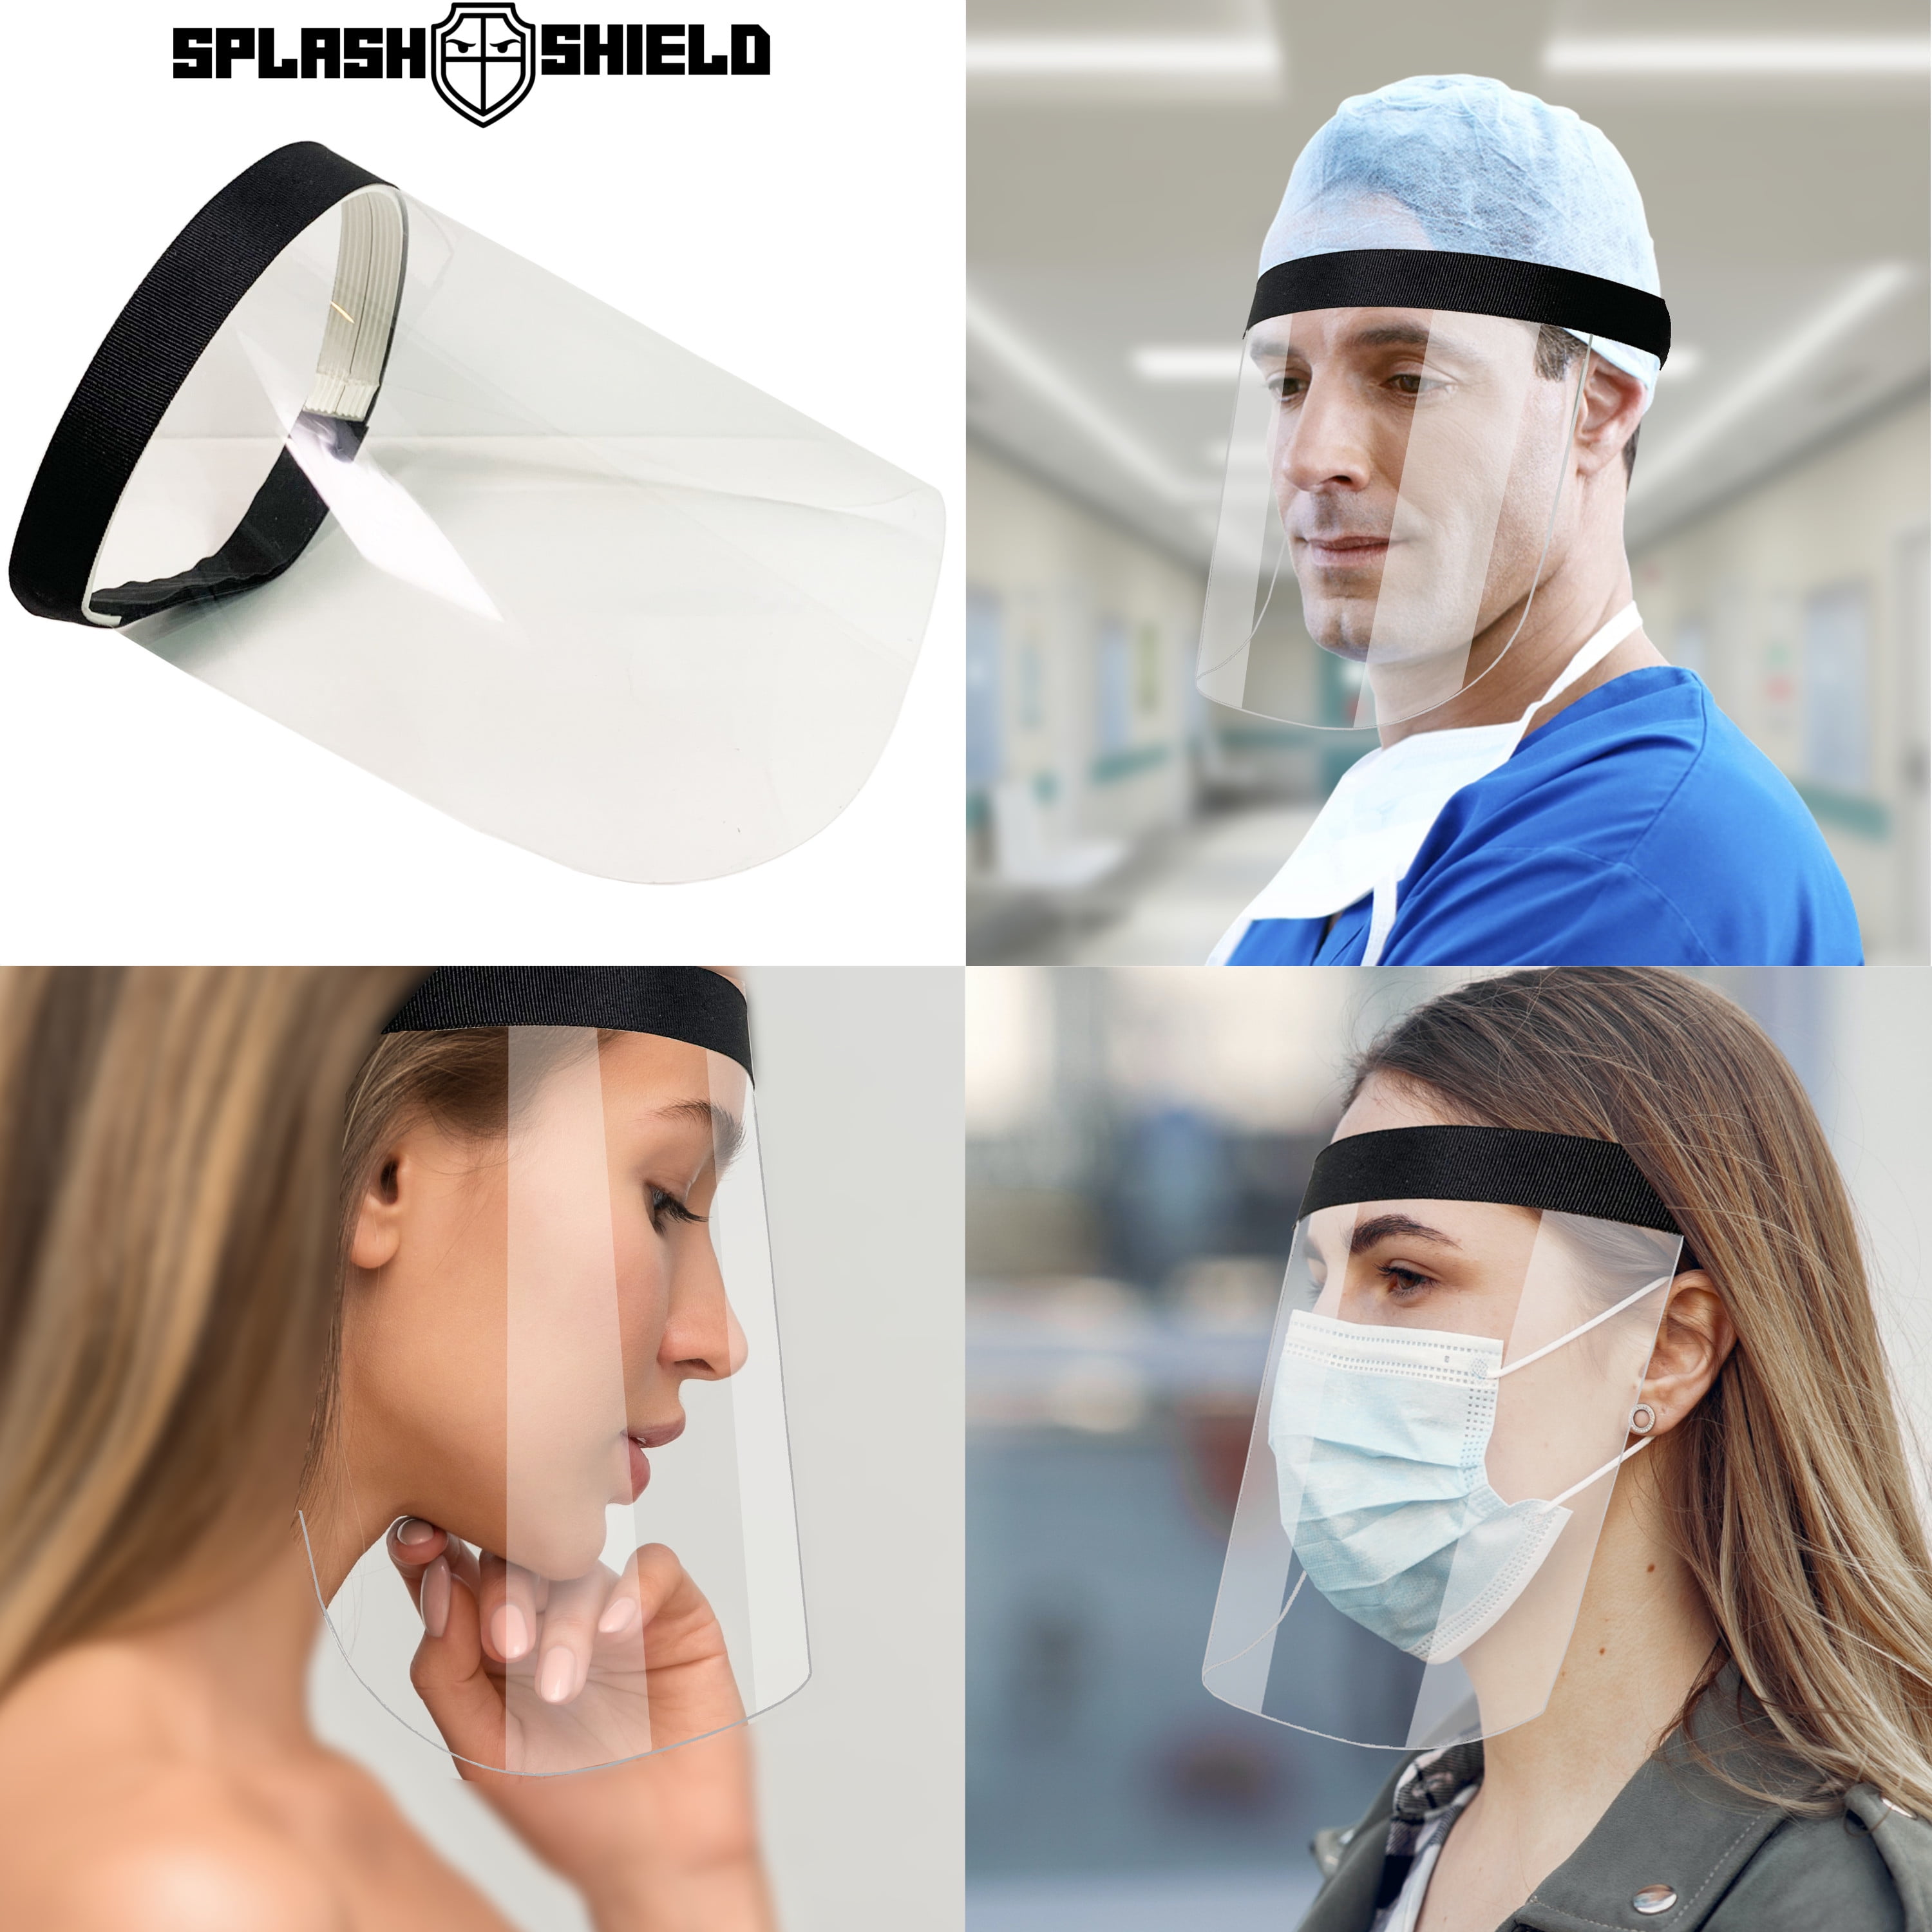 V by Vye Pink 1 Pack Lightweight Transparent Protective Safety Shields with Adjustable Headband Ships Direct from USA Molded Face Shield Face Guard for Men and Women